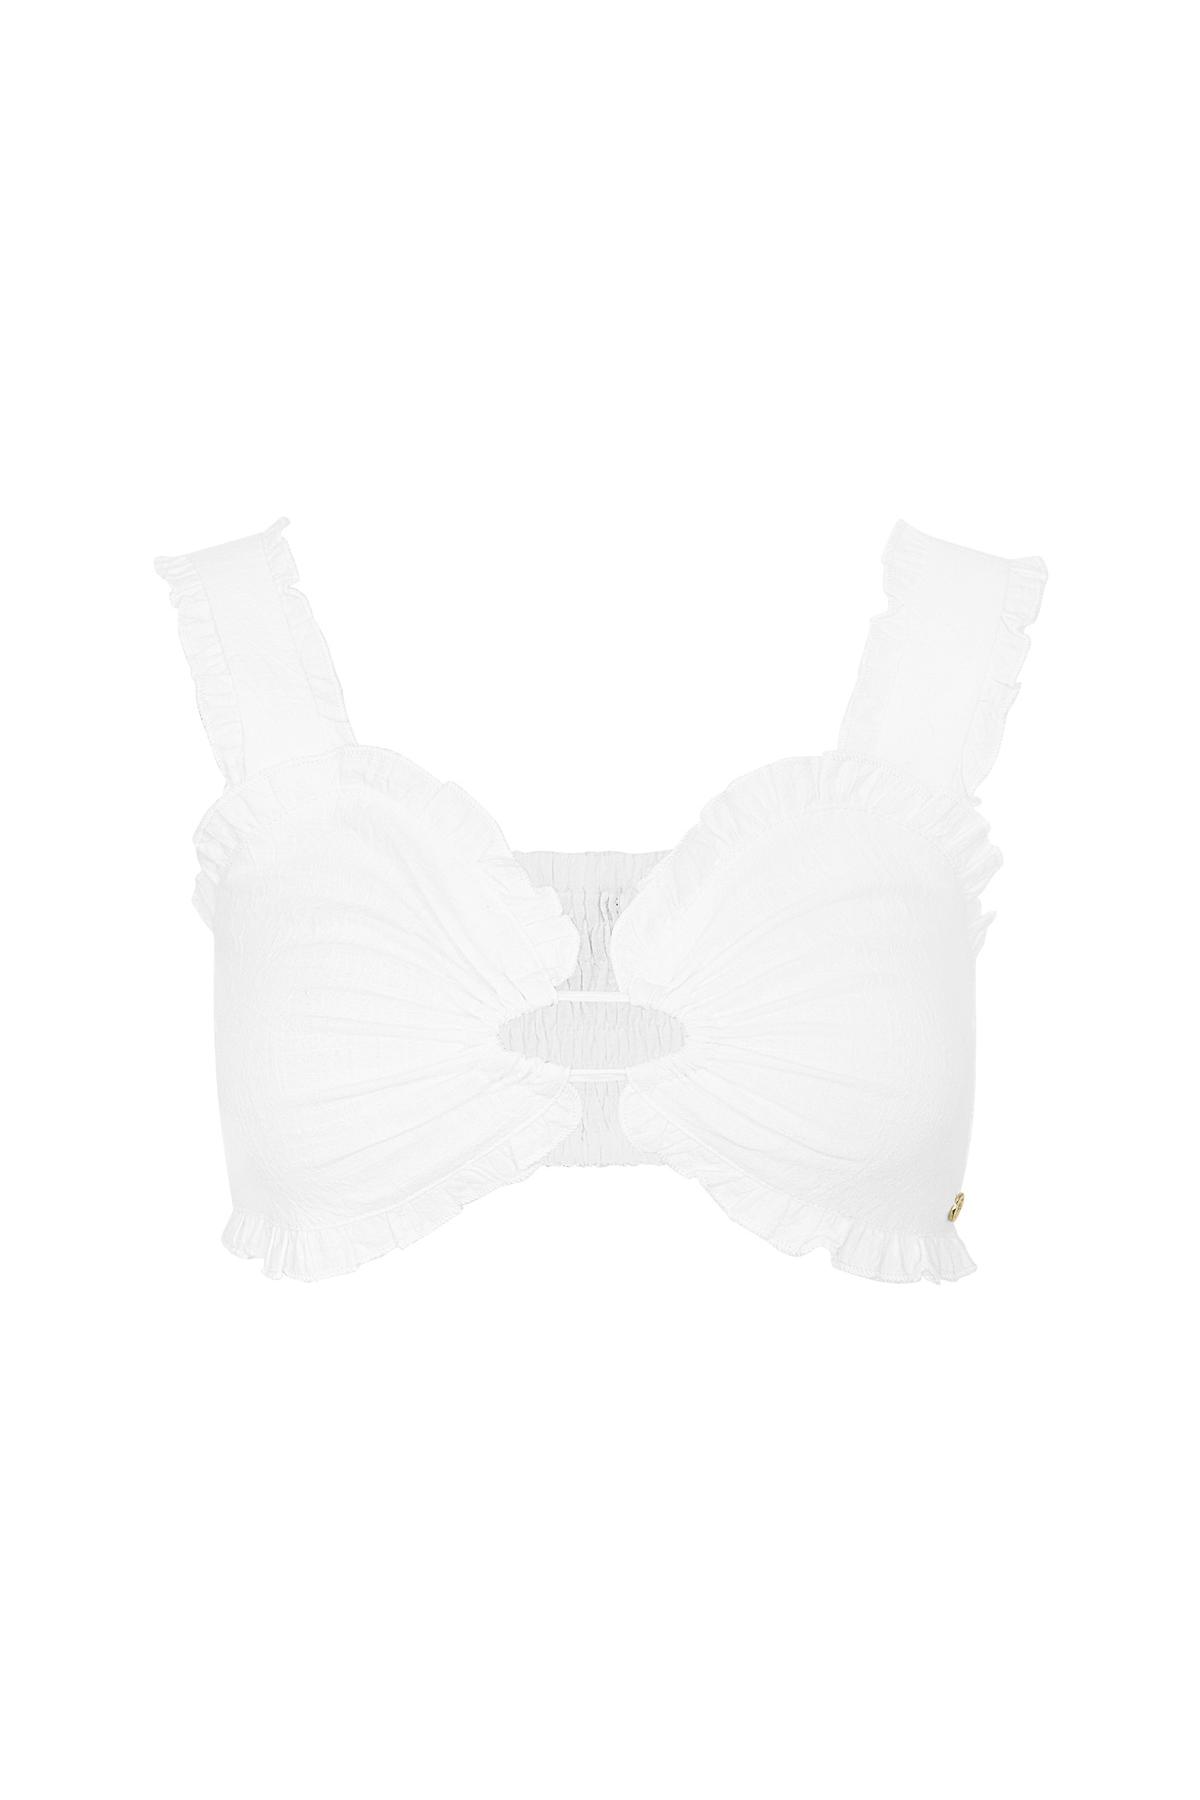 Crop top cut out - white S